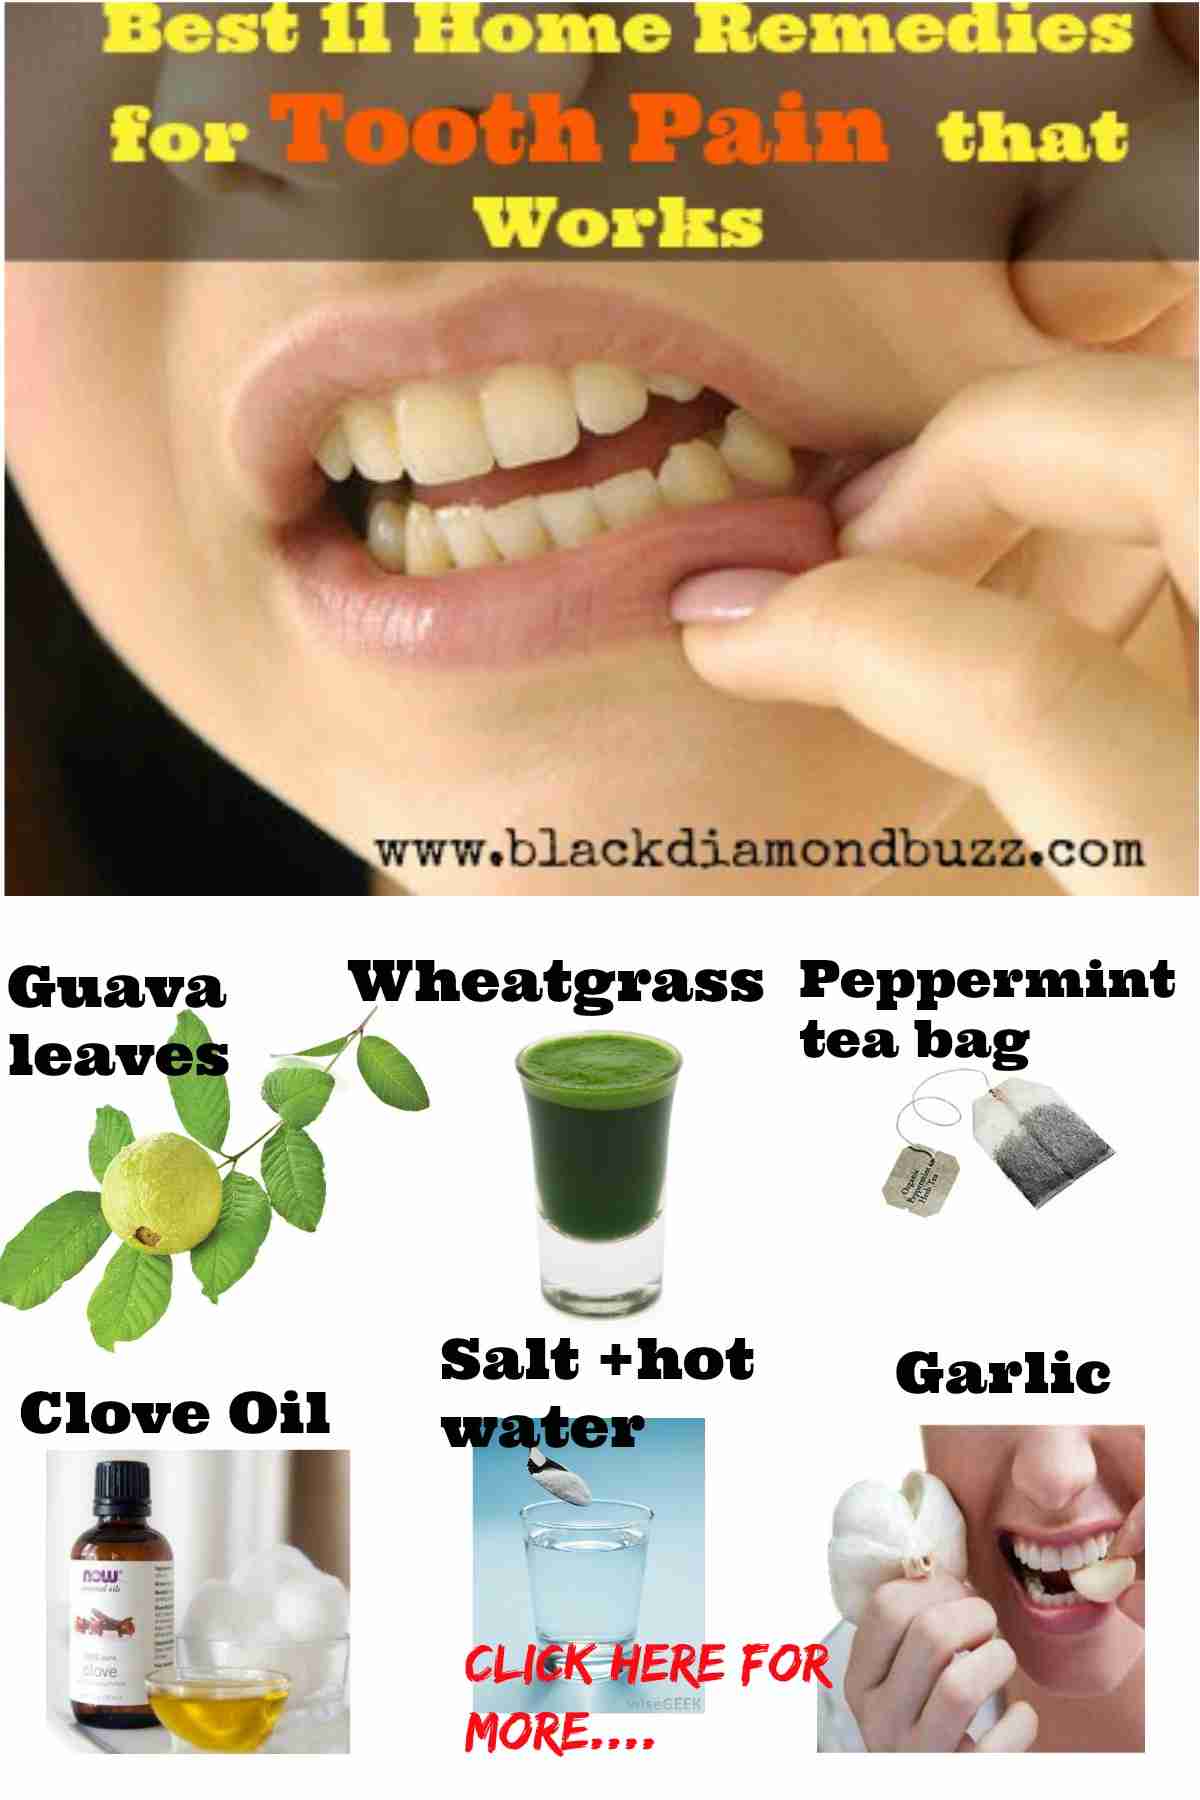 Best Home Remedies for Tooth Pain Relief and Gum Infection ...